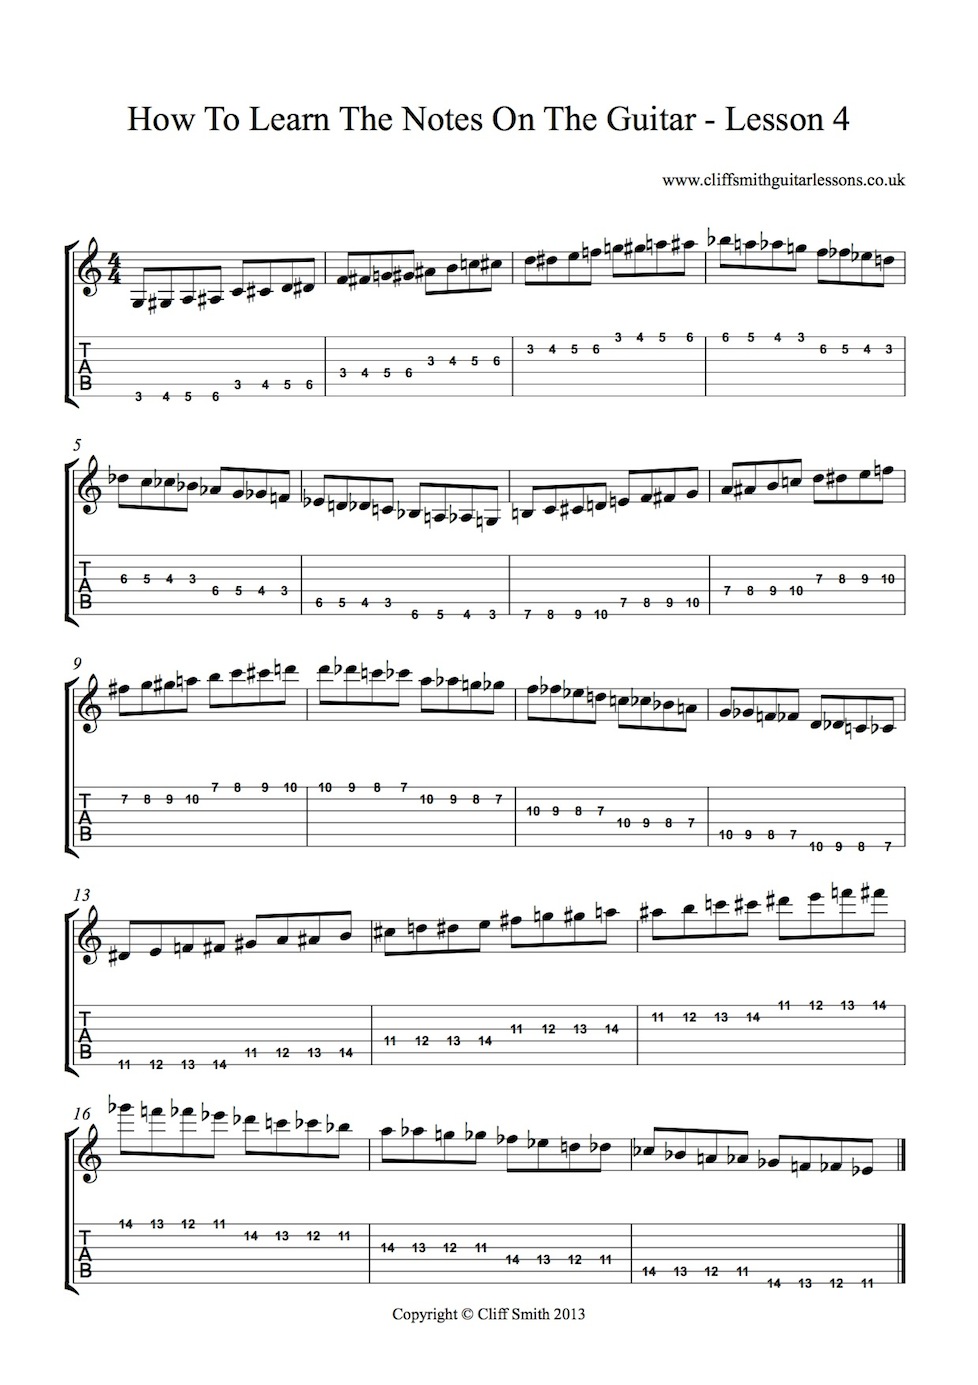 How to learn the notes on the guitar - lesson 4 - Cliff Smith Guitar Lessons London